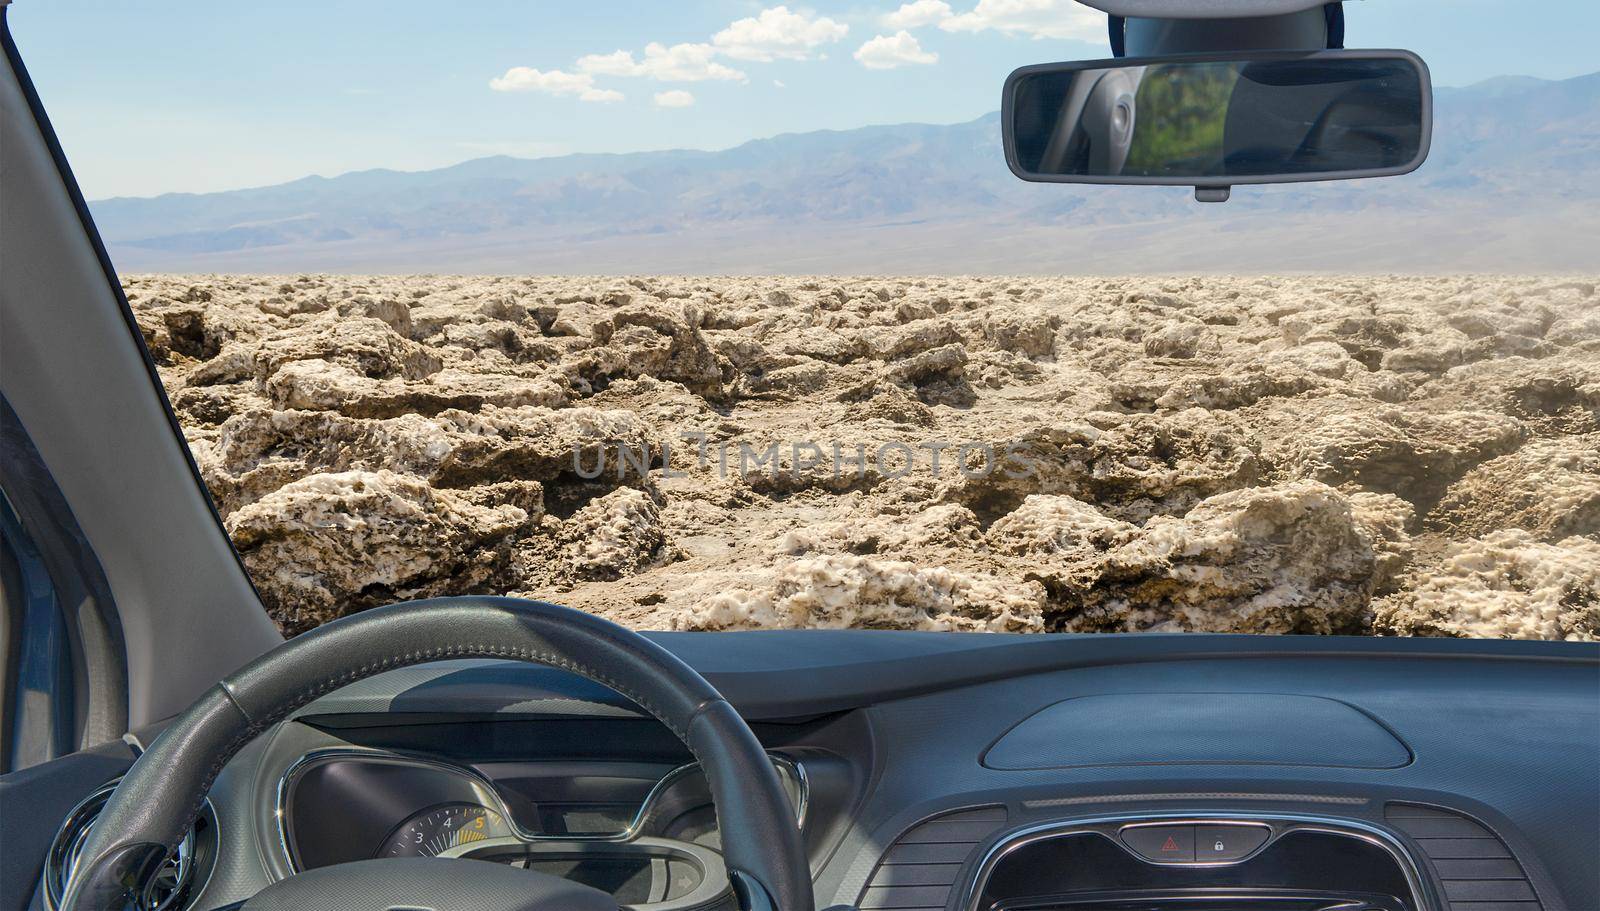 Car windshield view of Devil's Golf Course, Death Valley, USA by marcorubino